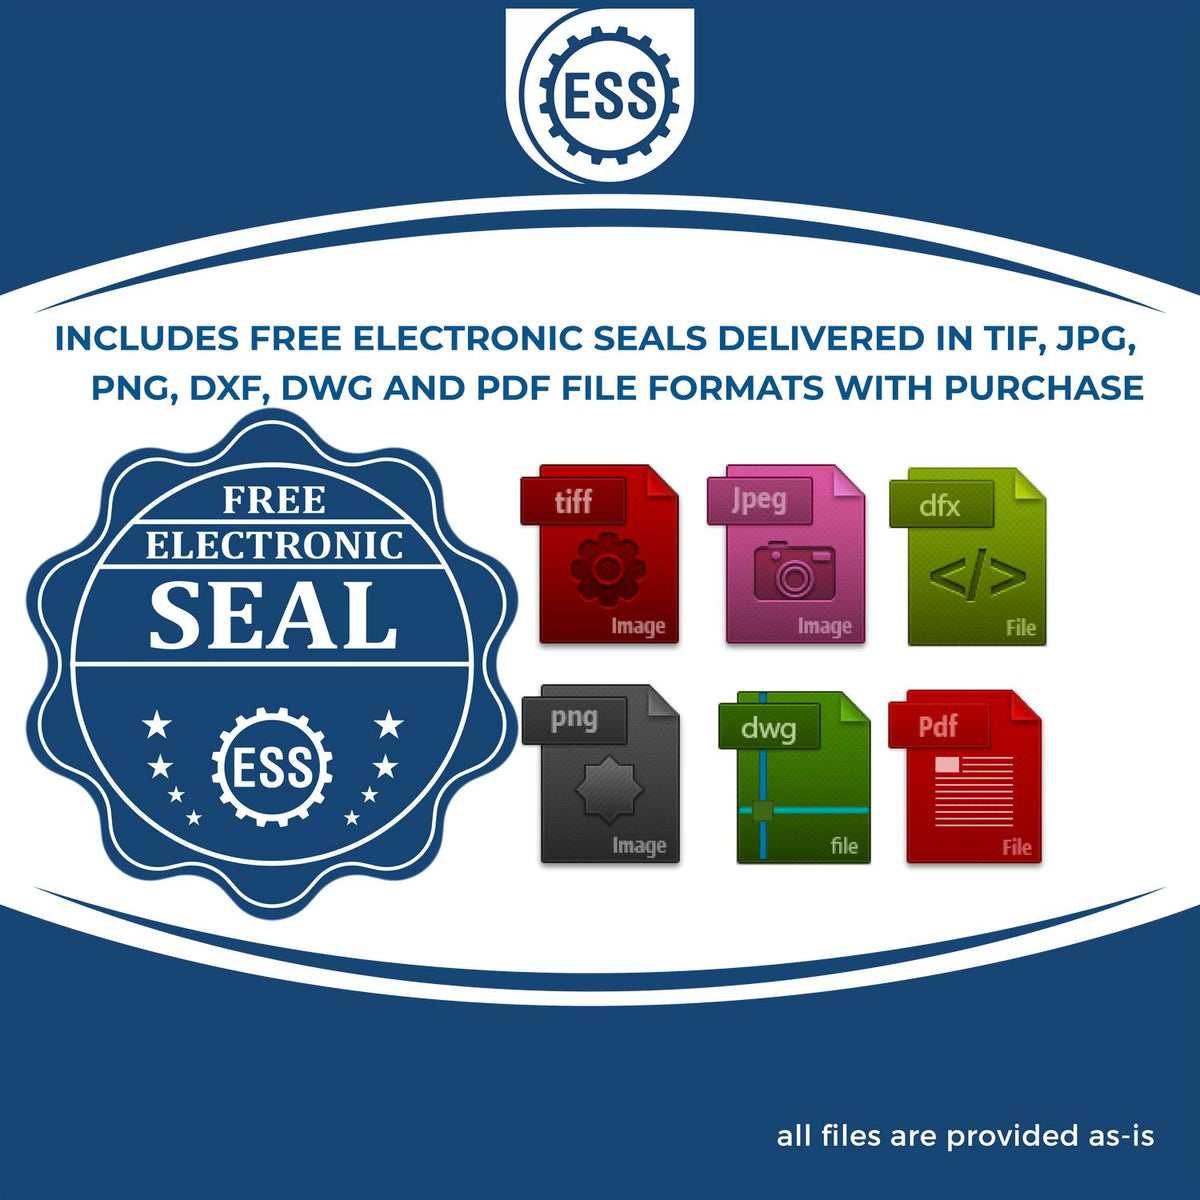 An infographic for the free electronic seal for the Gift Utah Architect Seal illustrating the different file type icons such as DXF, DWG, TIF, JPG and PNG.